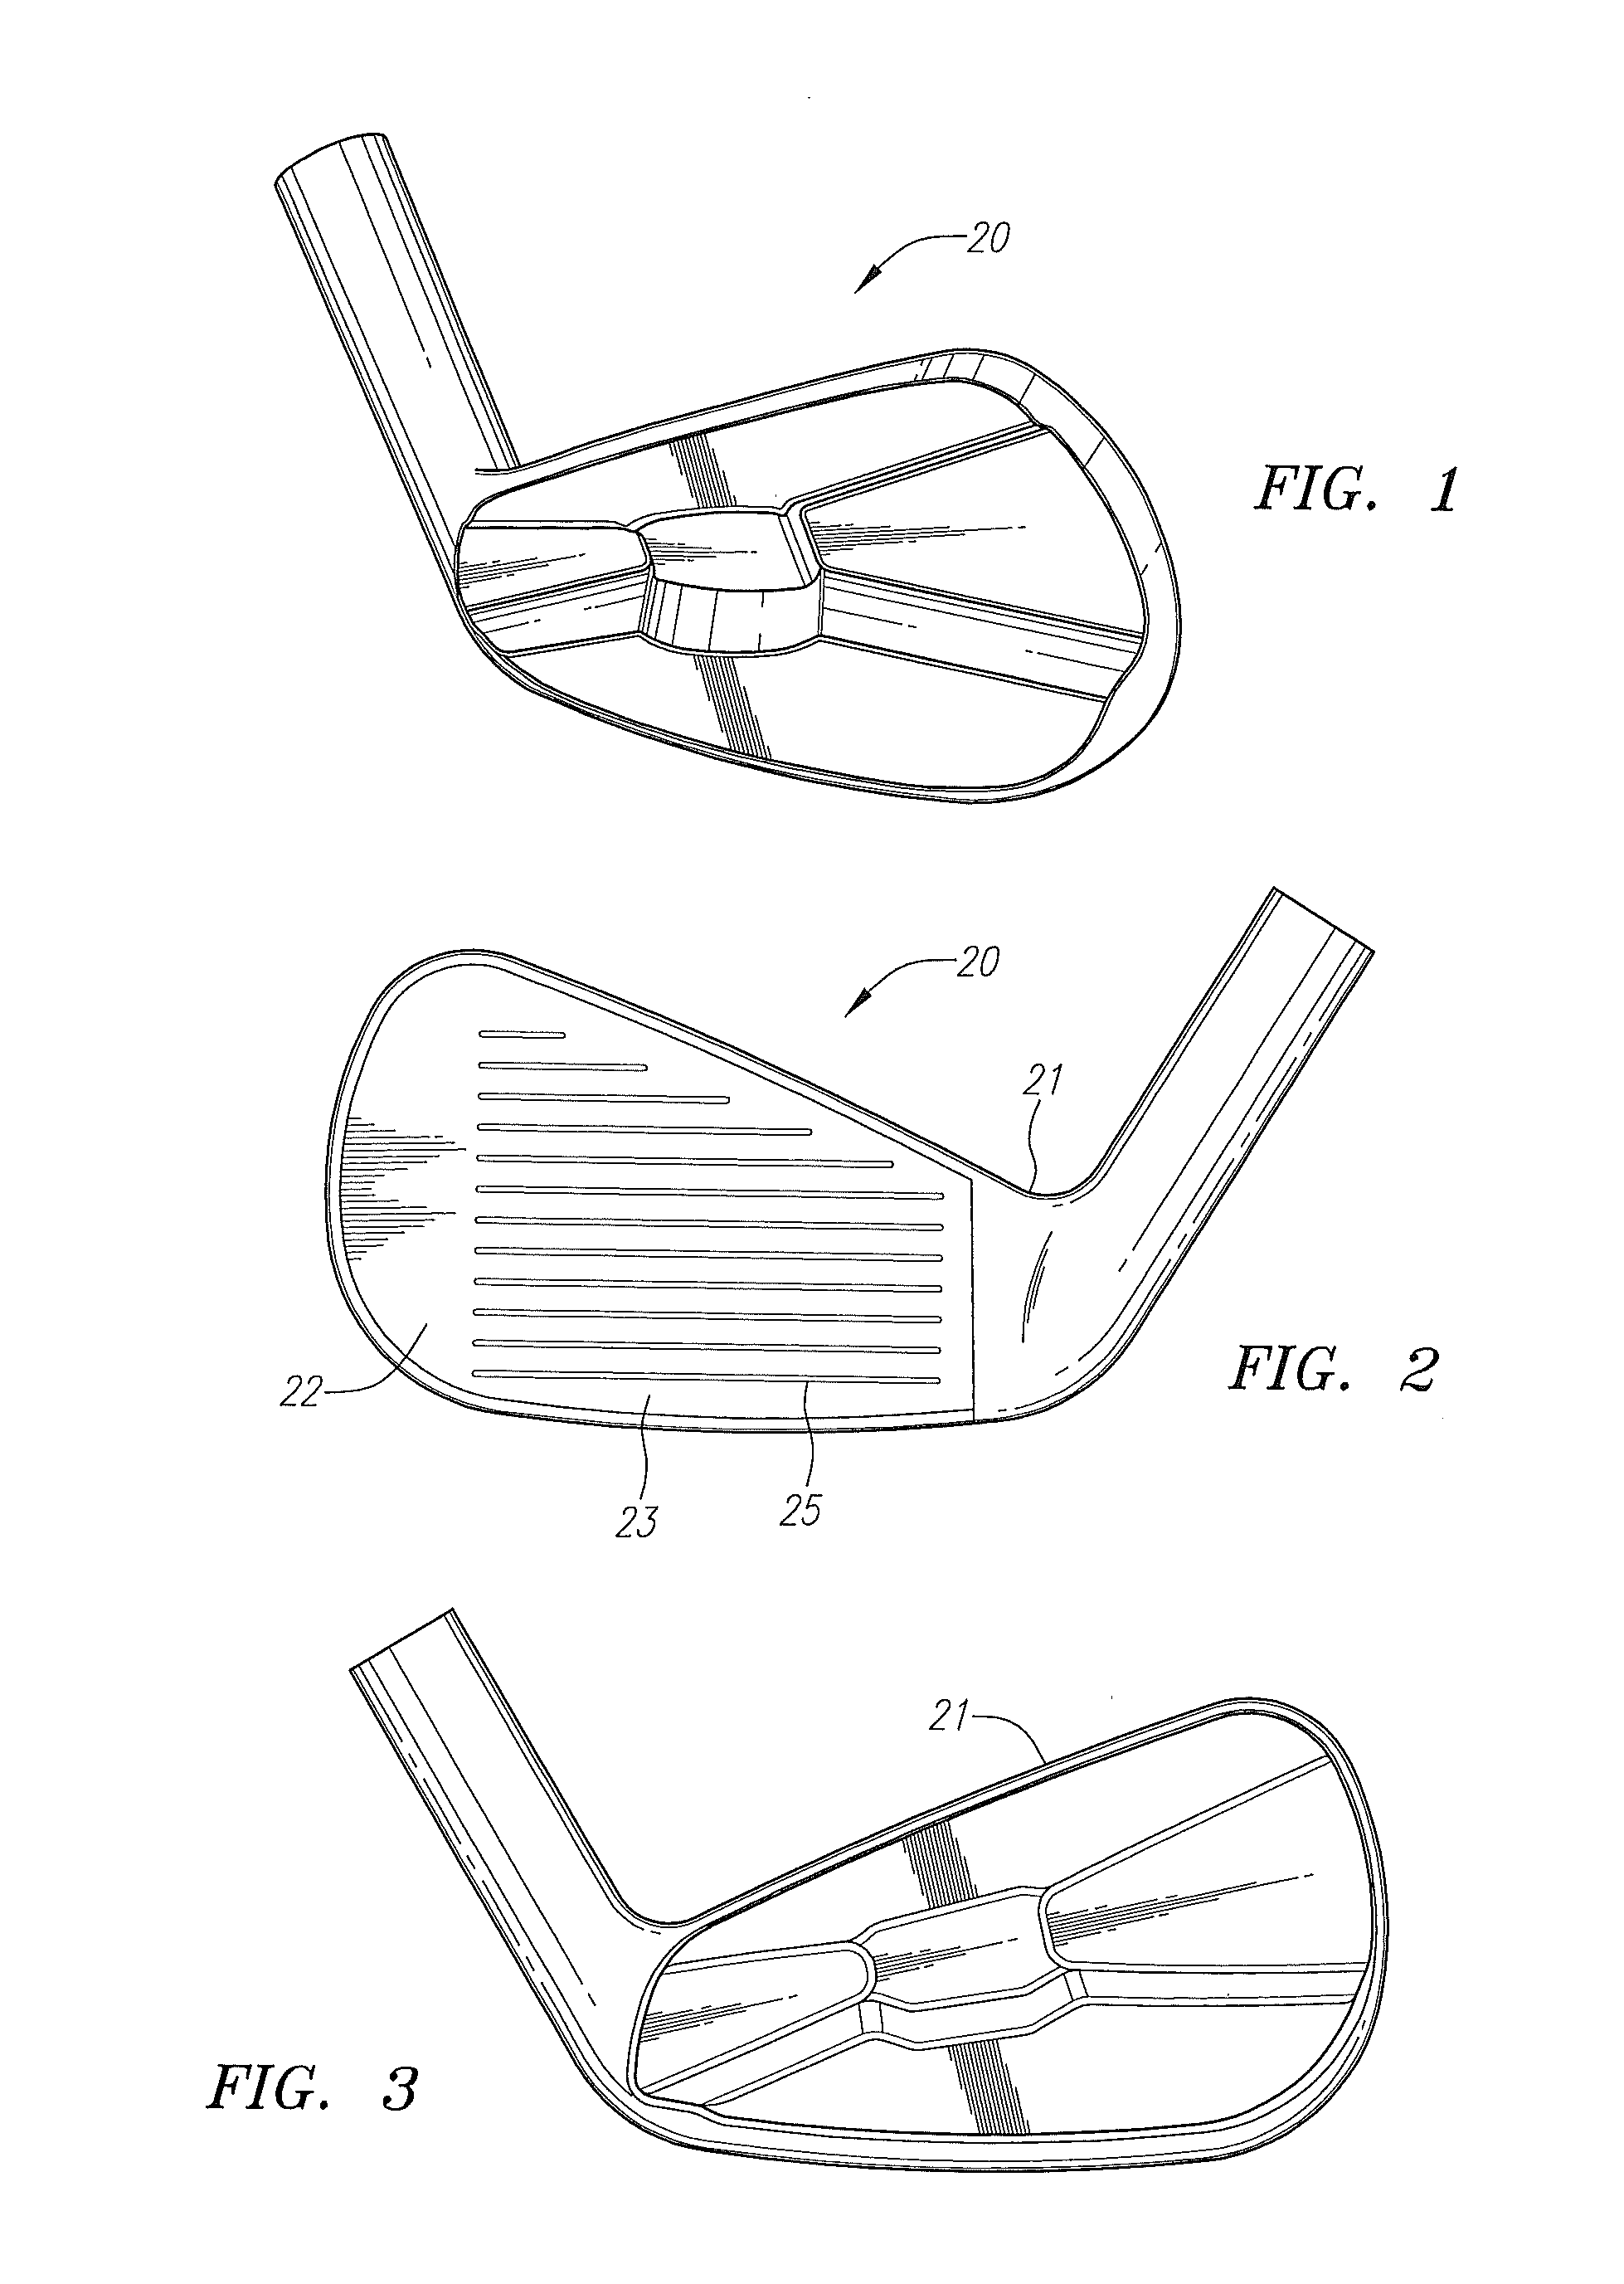 Iron-type golf club head with groove profile in ceramic face